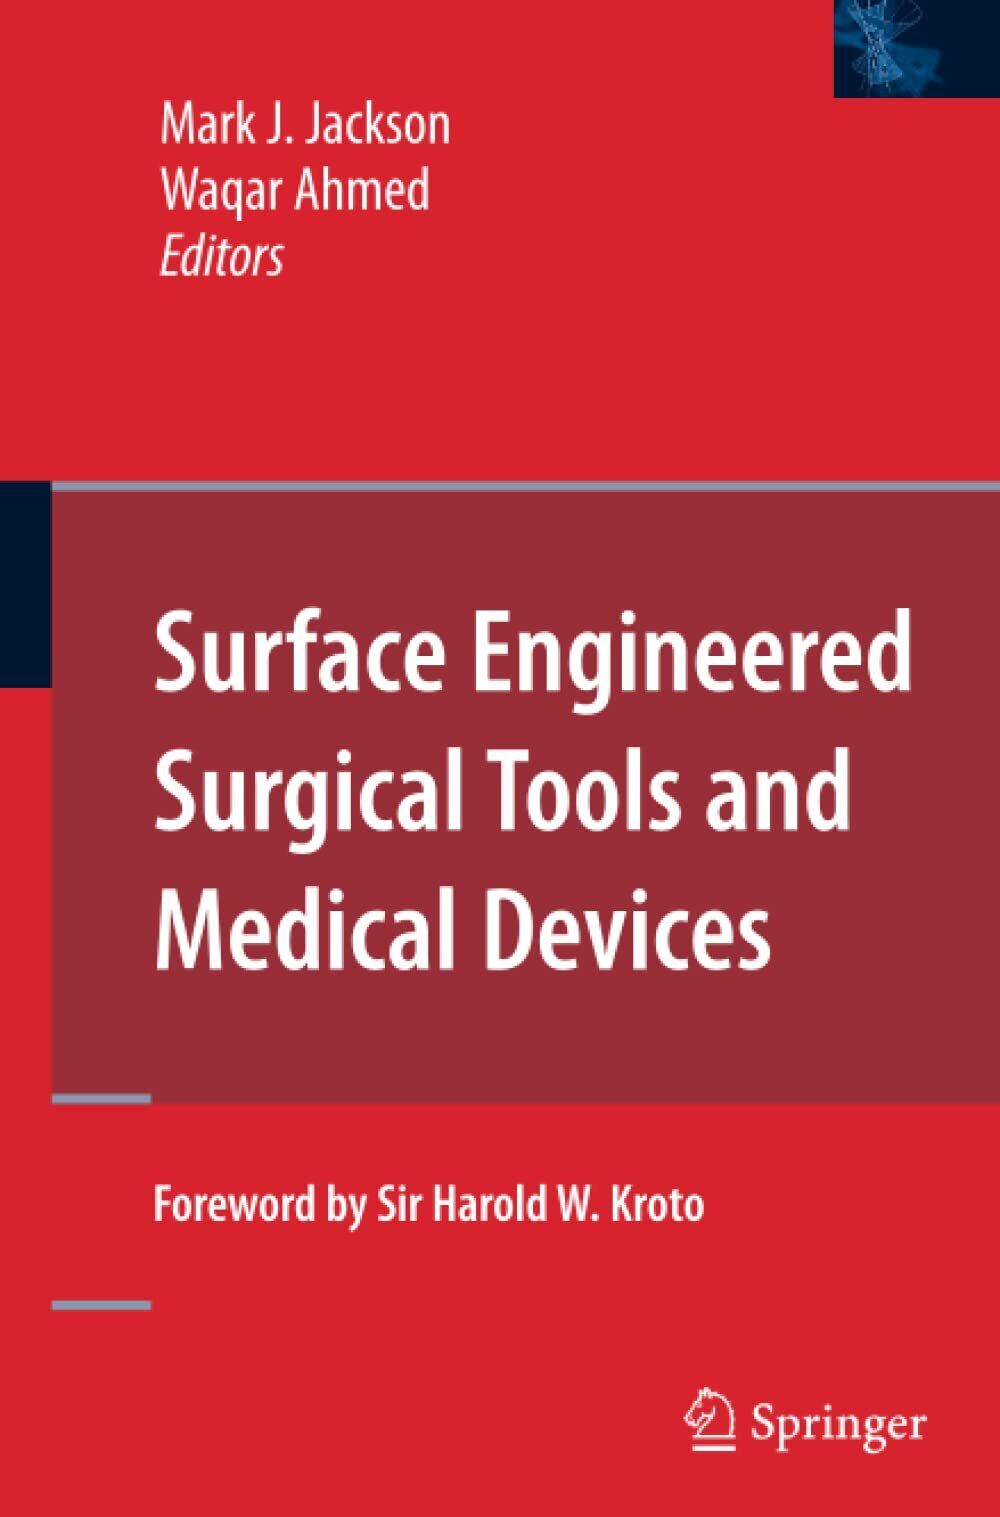 Surface Engineered Surgical Tools and Medical Devices - Mark J. Jackson - 2014